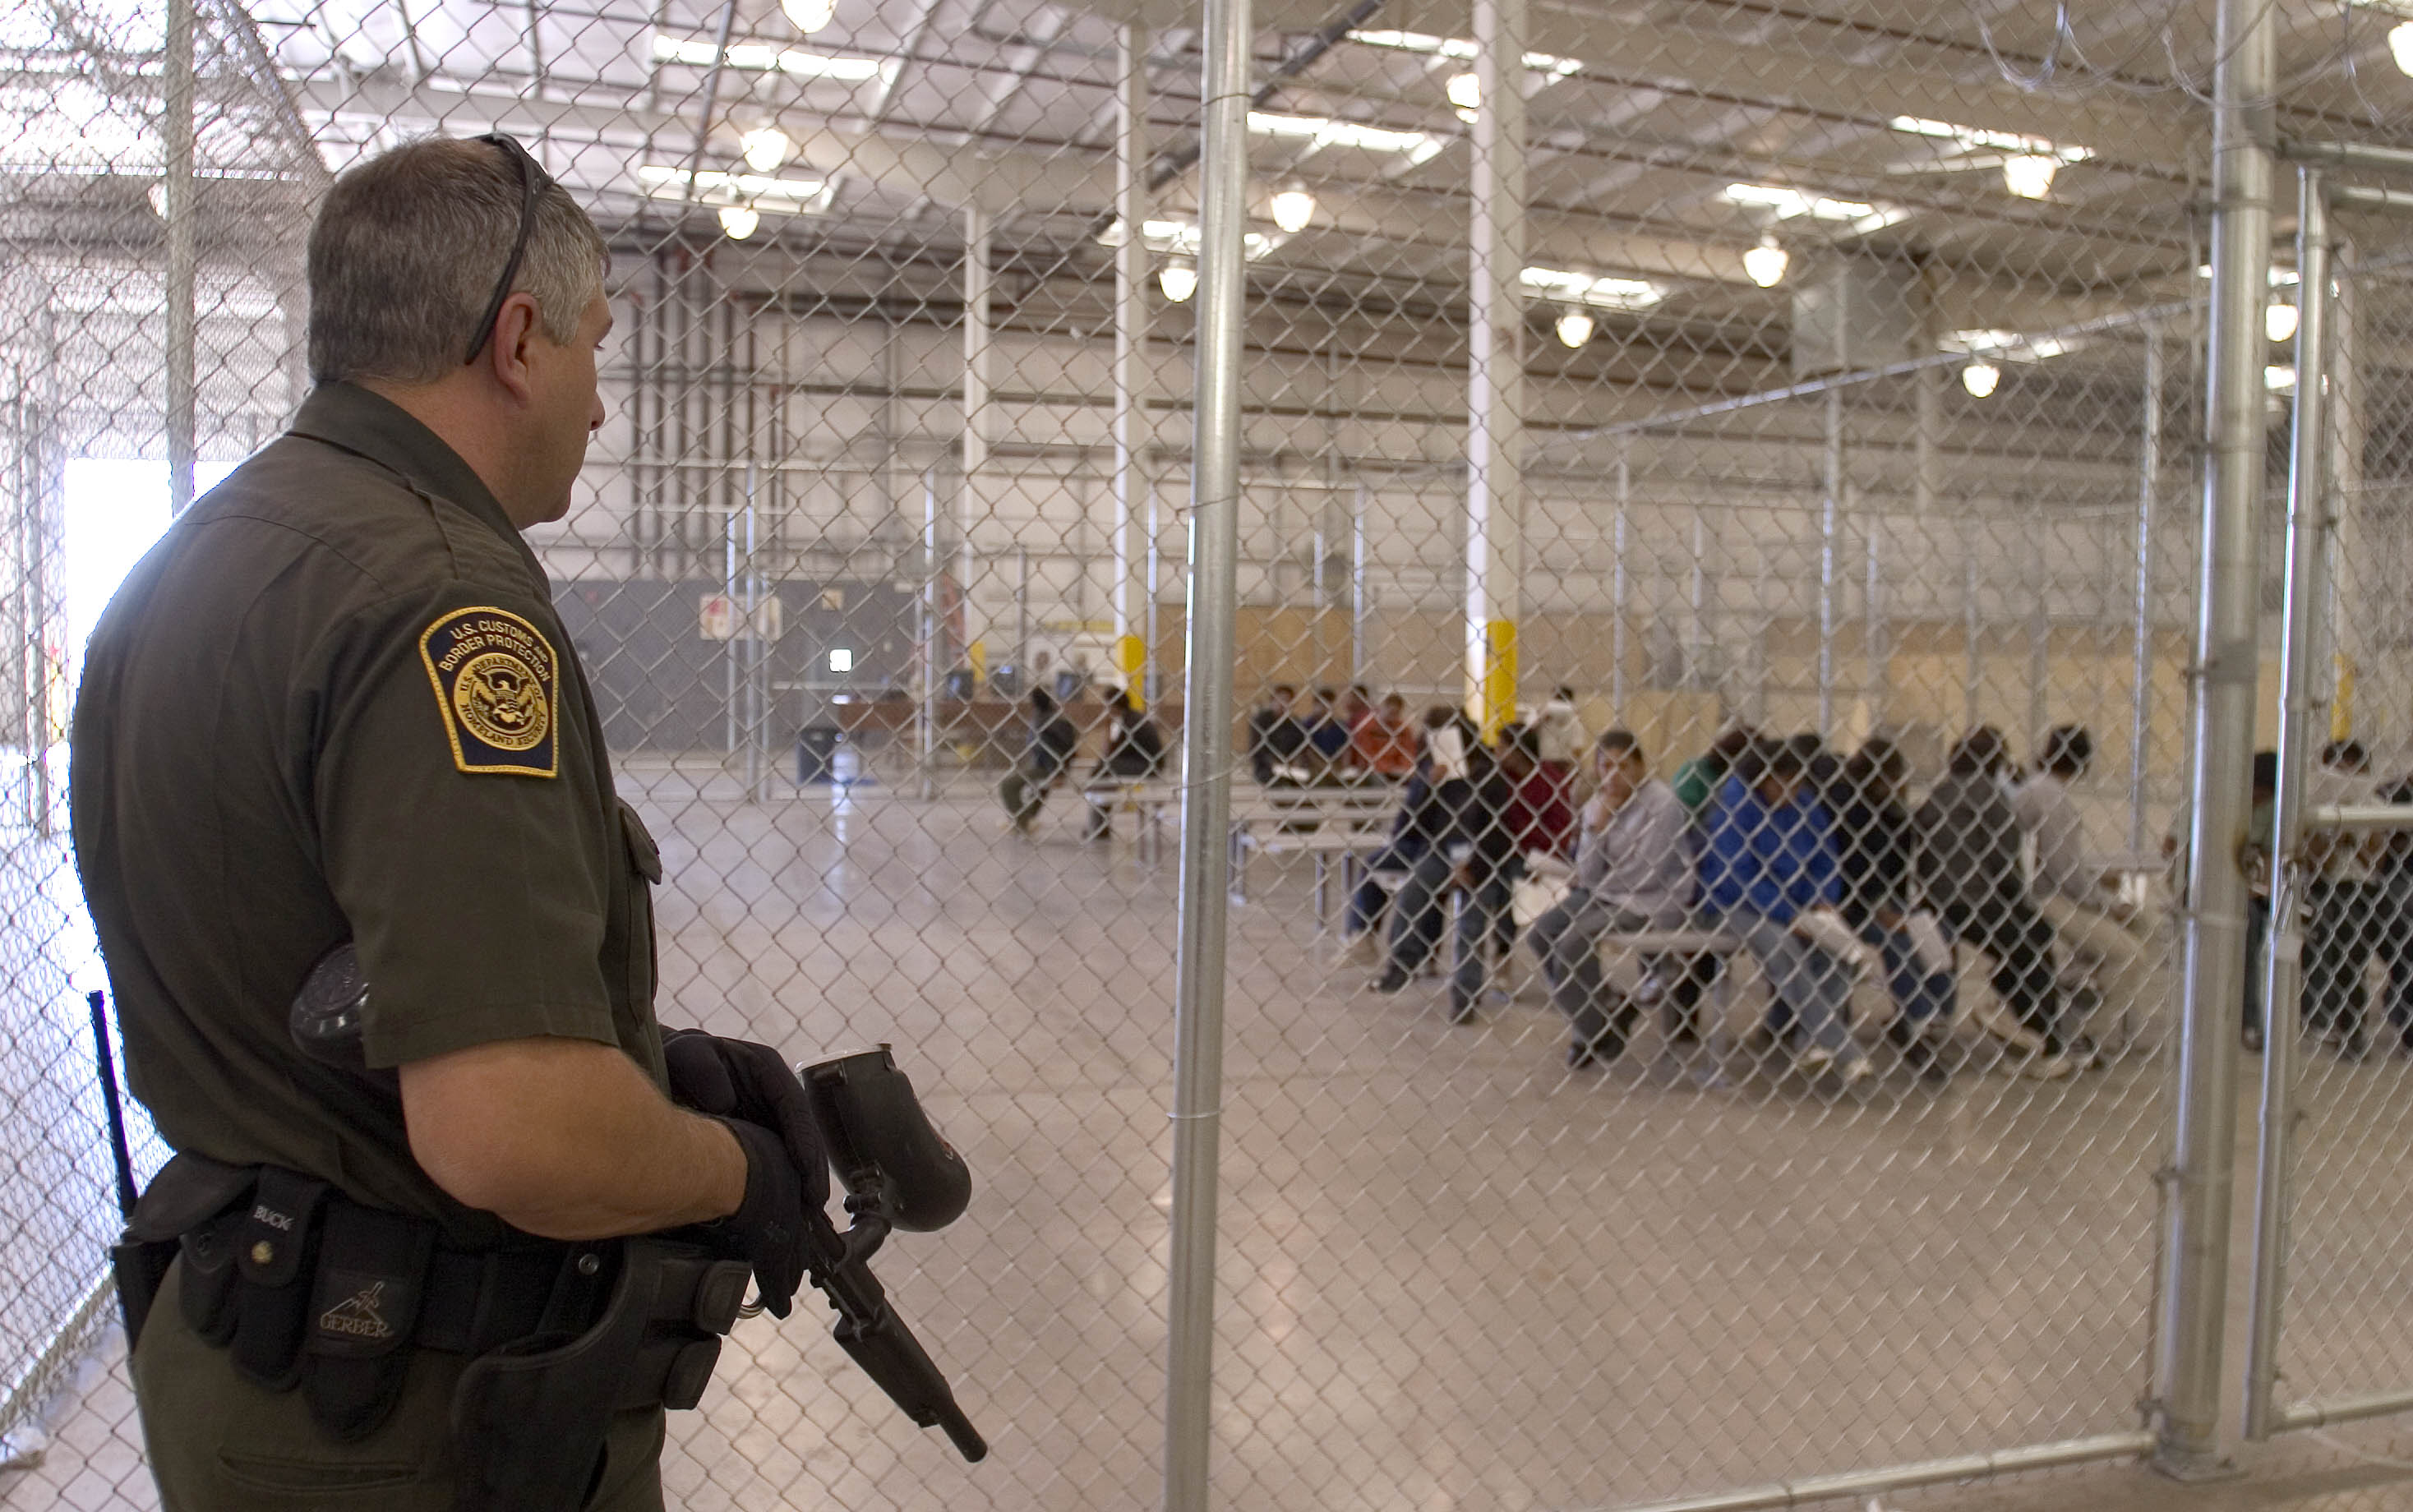 Illegal migrants are placed in holding facilities before they are returned to Mexico.